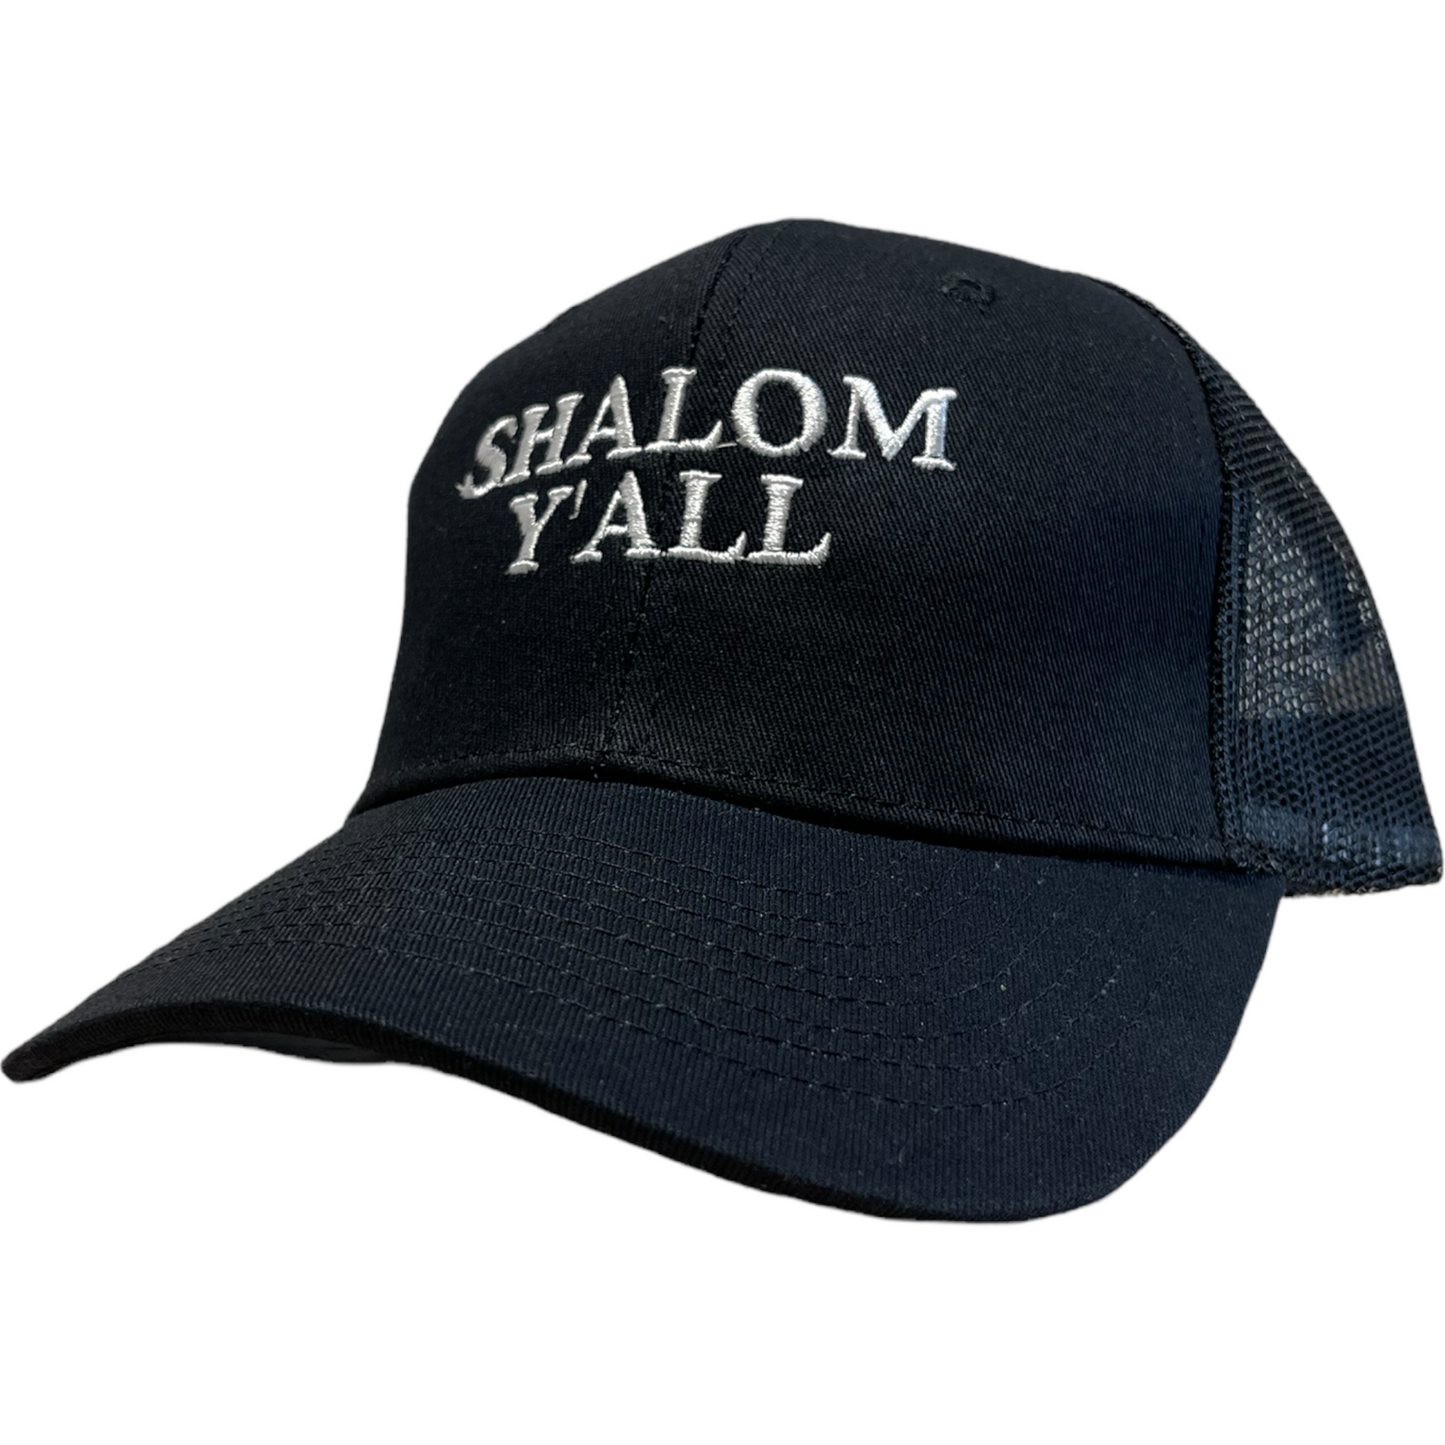 Shalom Y'all embroidered mesh cap